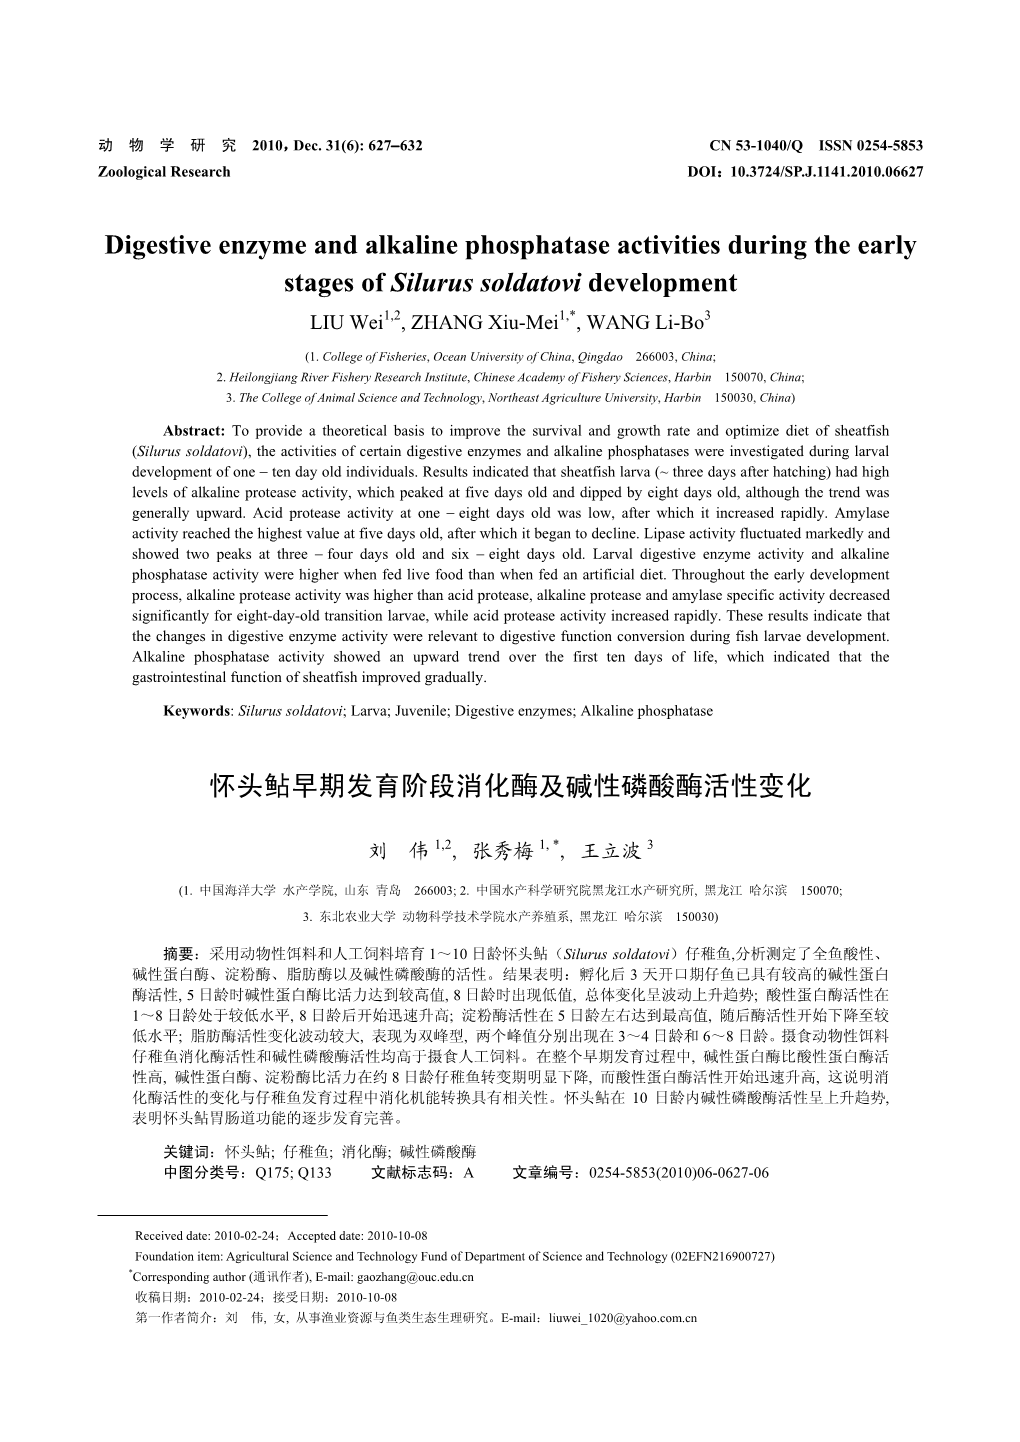 Digestive Enzyme and Alkaline Phosphatase Activities During the Early Stages of Silurus Soldatovi Development LIU Wei1,2, ZHANG Xiu-Mei1,*, WANG Li-Bo3